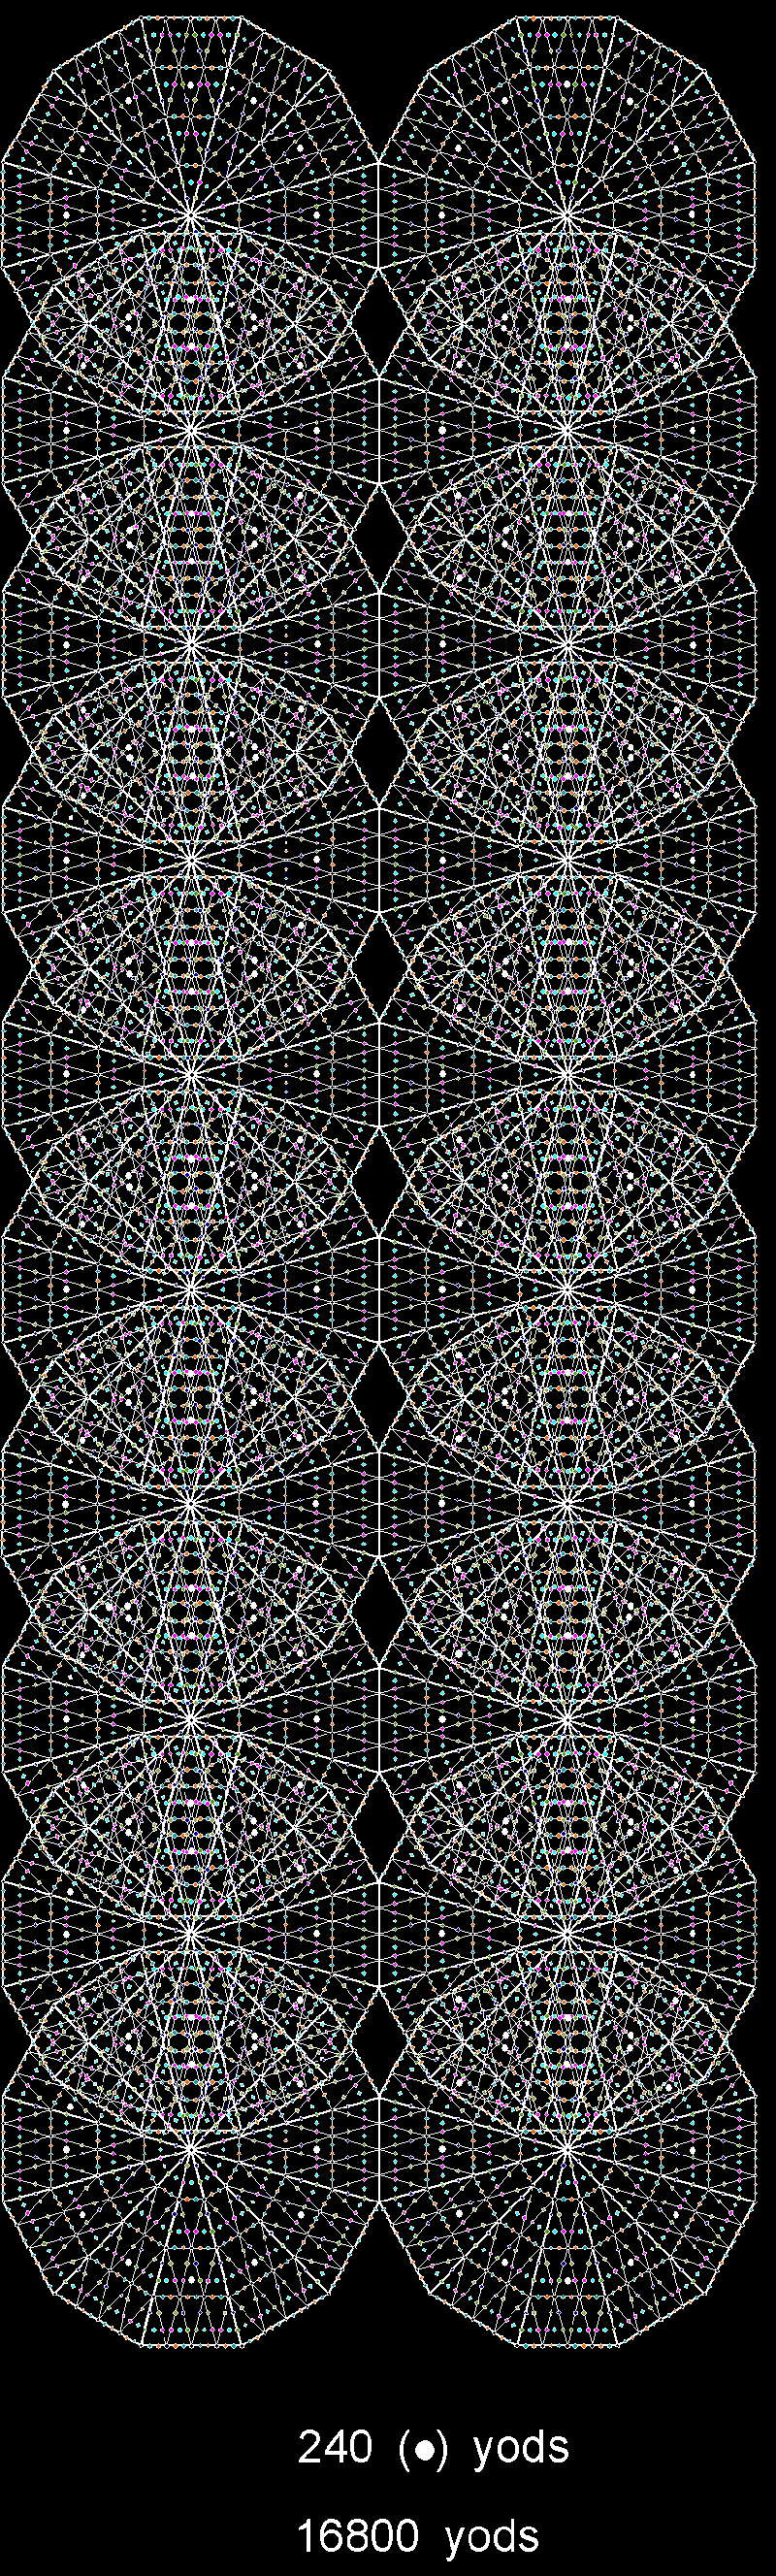 16800 yods and 240 central yods outside root edge in (10+10) enfolded dodecagons